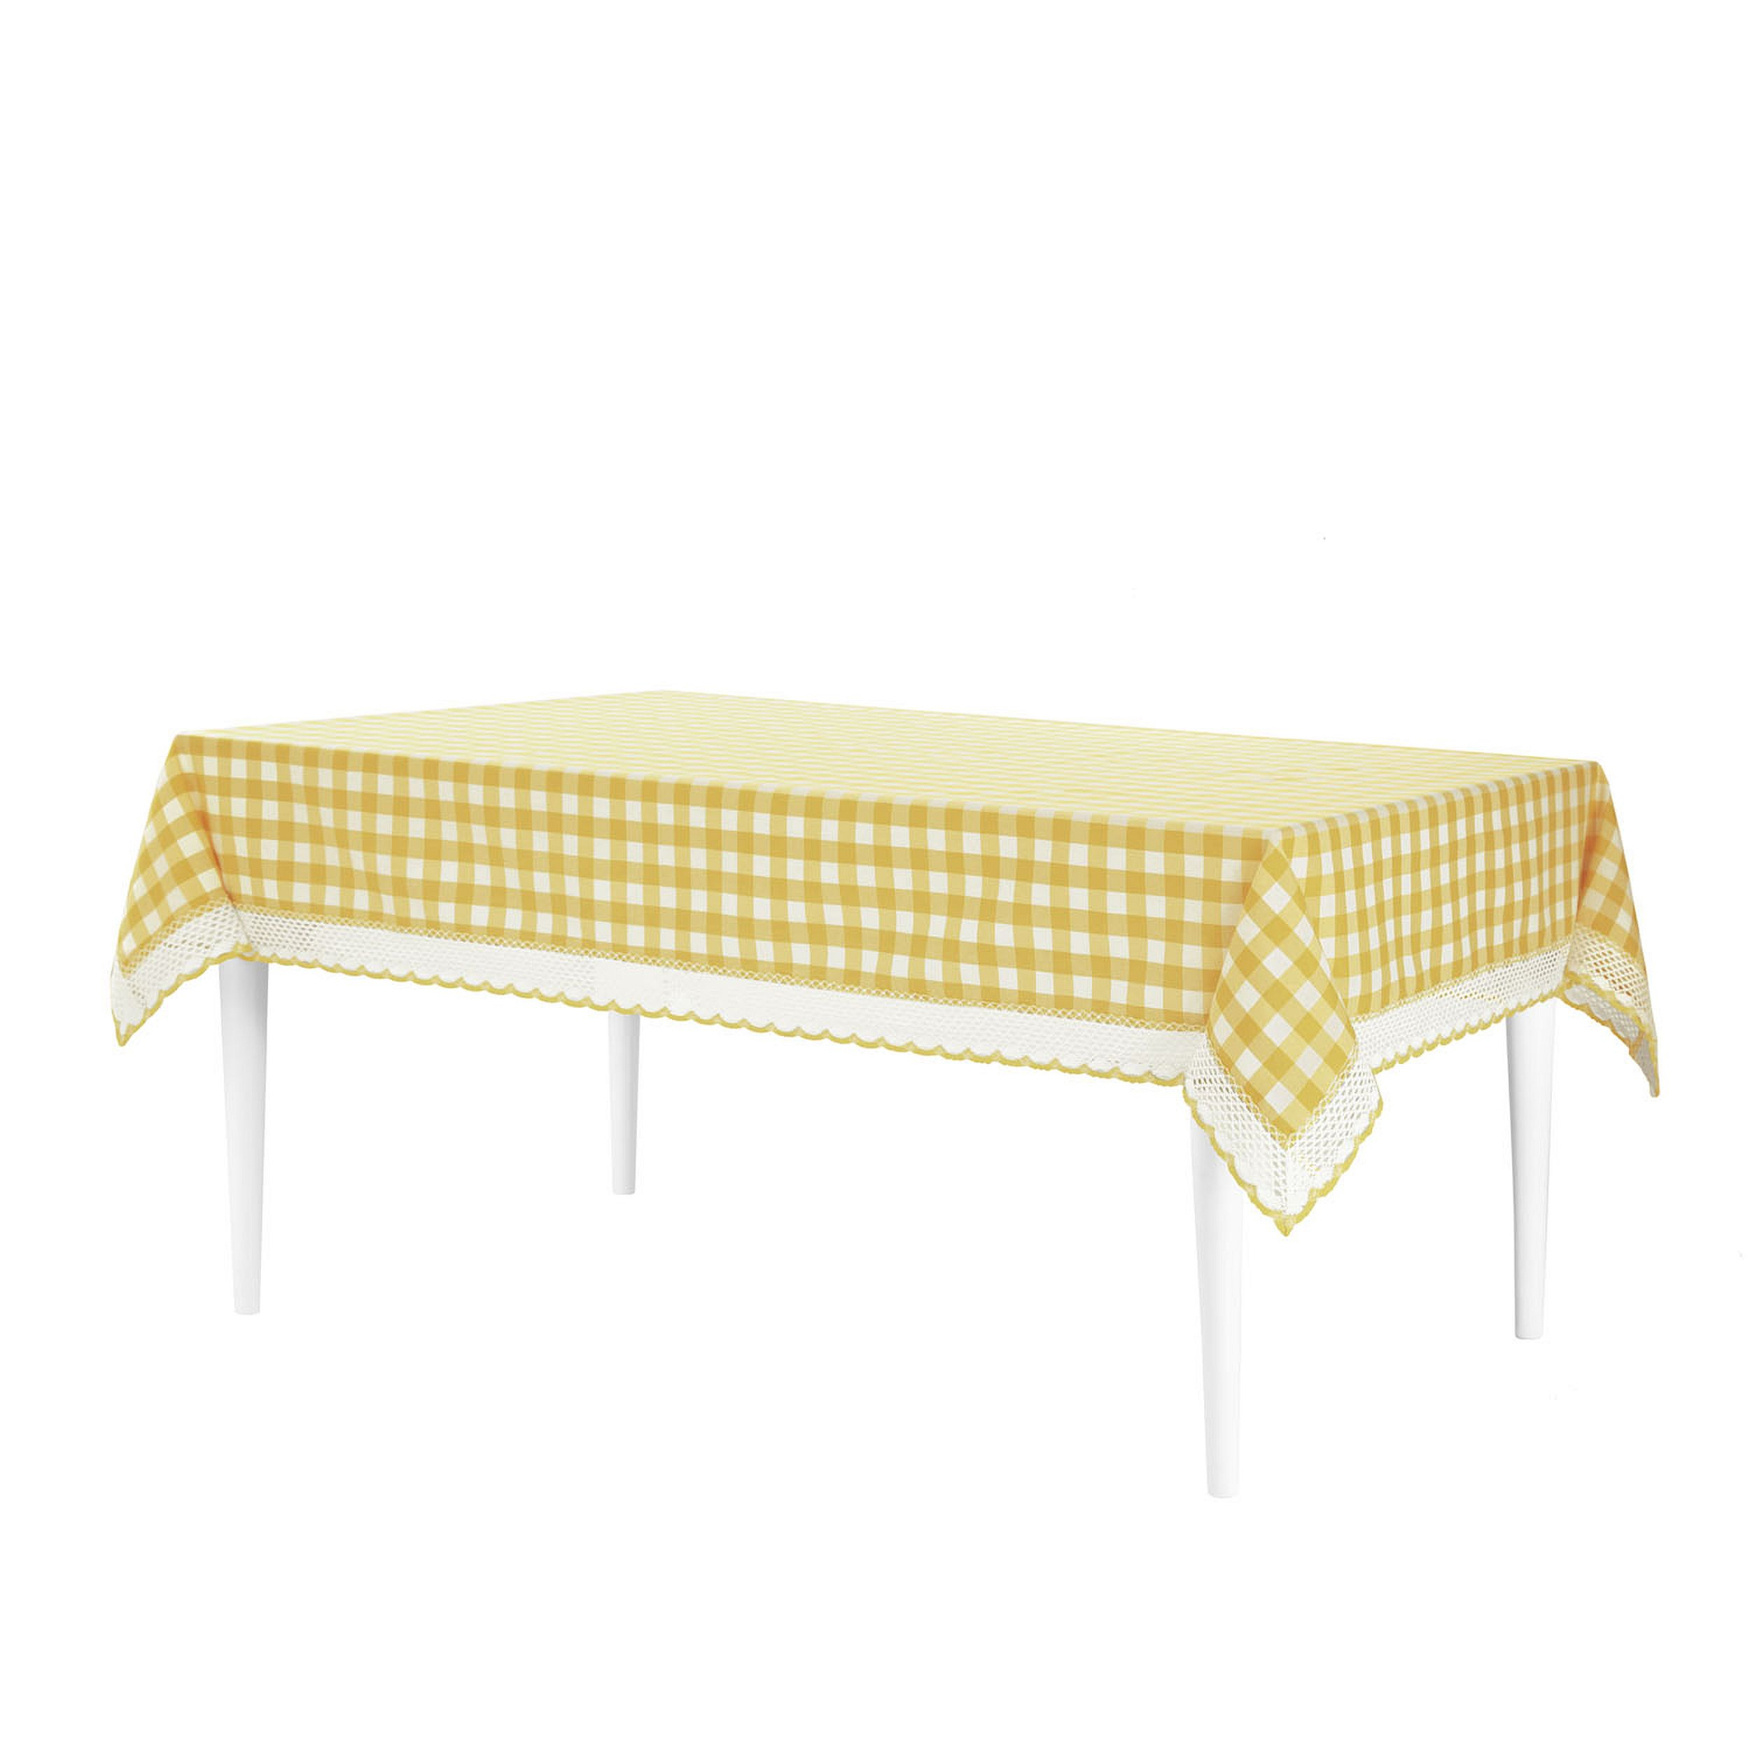 Buffalo Check Tablecloth - 60-in x 104-in, 